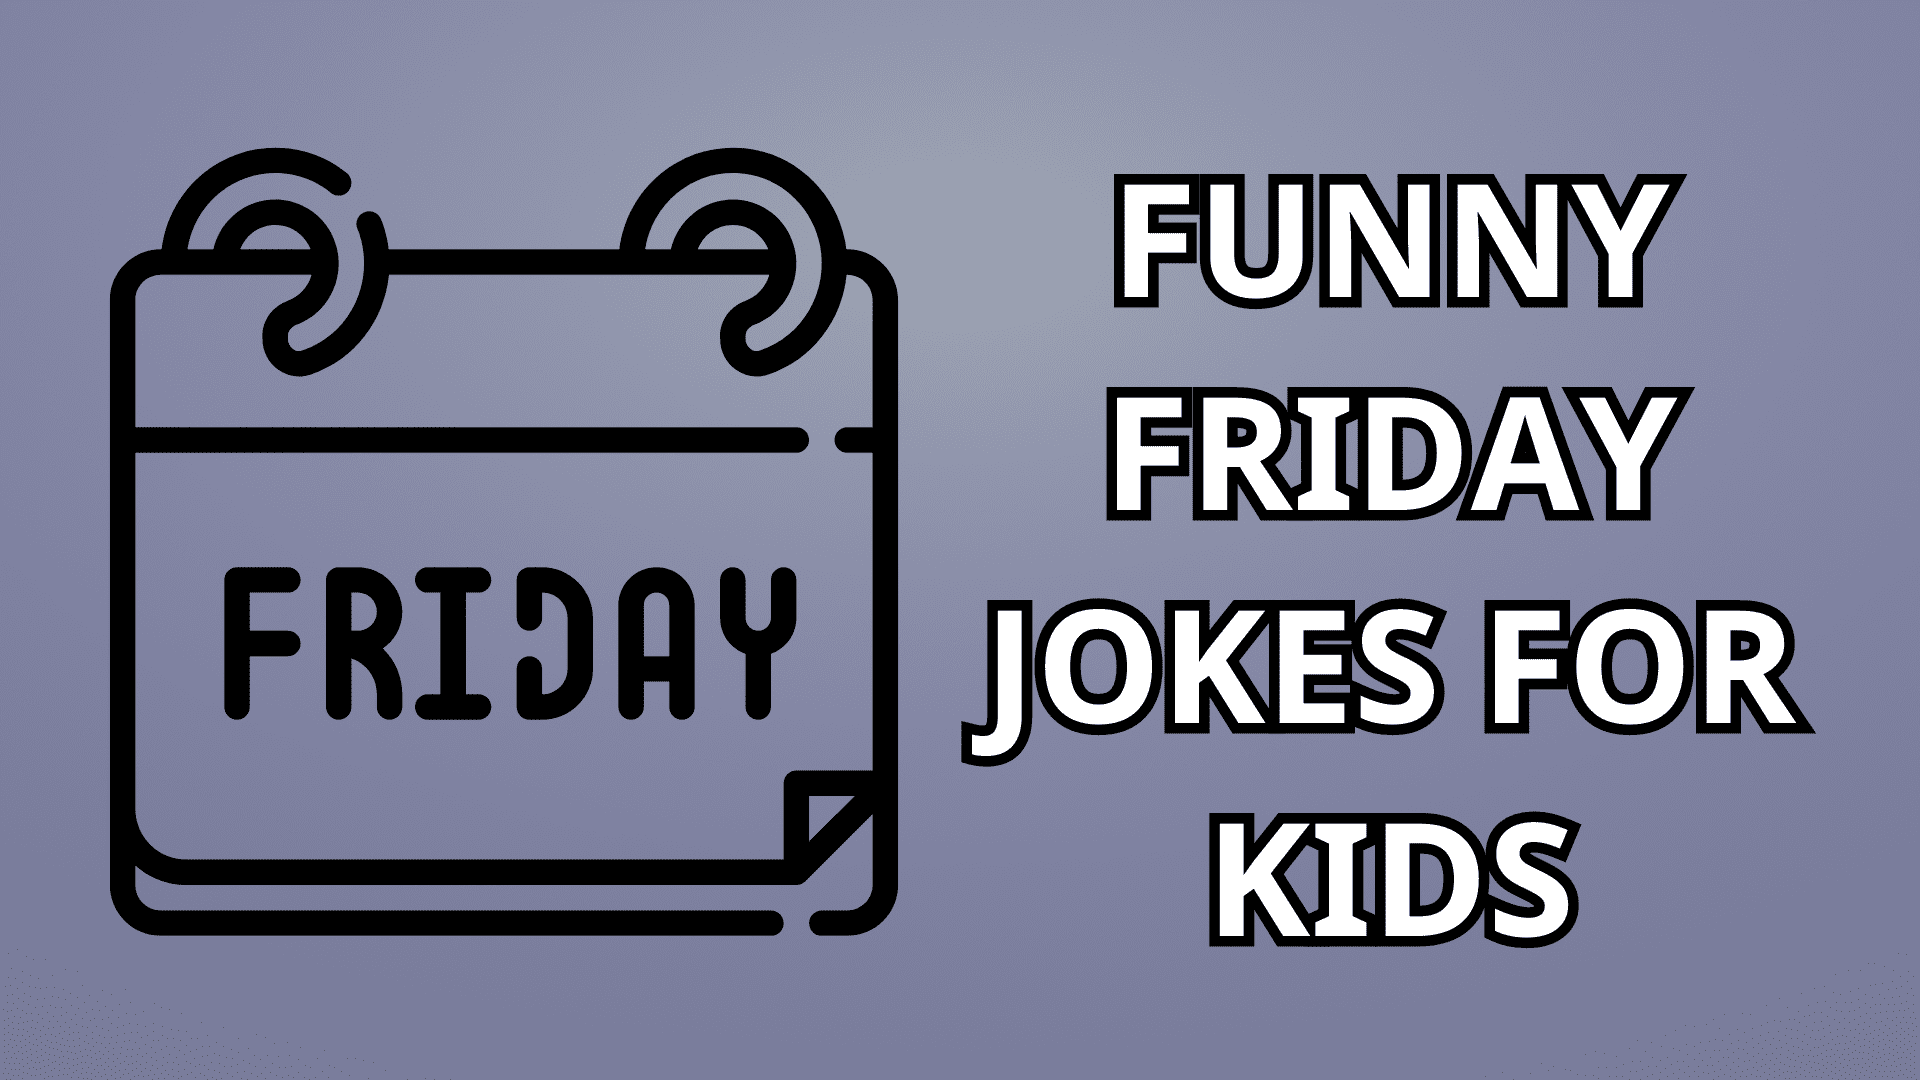 A flip calendar with the text "FRIDAY" on the whole page. The text "Funny Friday Jokes for Kids" against a light grey background.